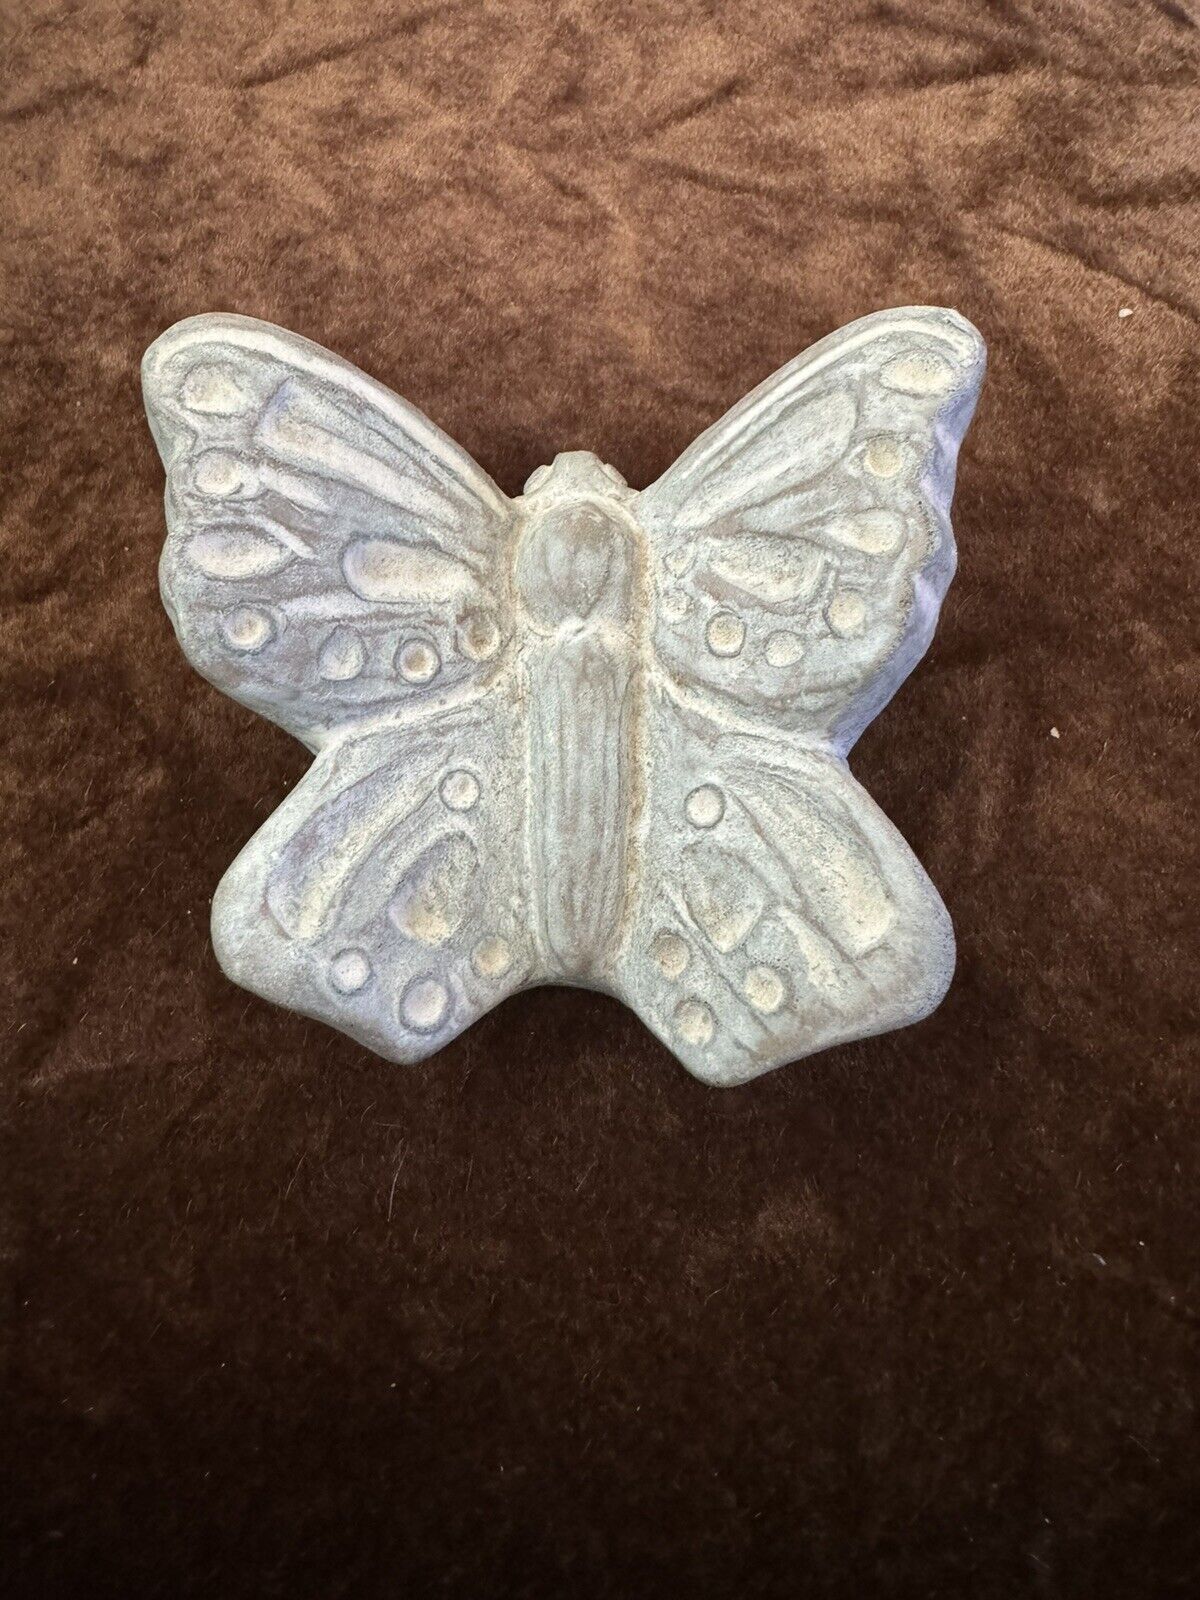 ISABEL BLOOM 2001 BLUE GRAY 3 INCH BUTTERFLY SCULPTURE  SIGNED RETIRED VINTAGE